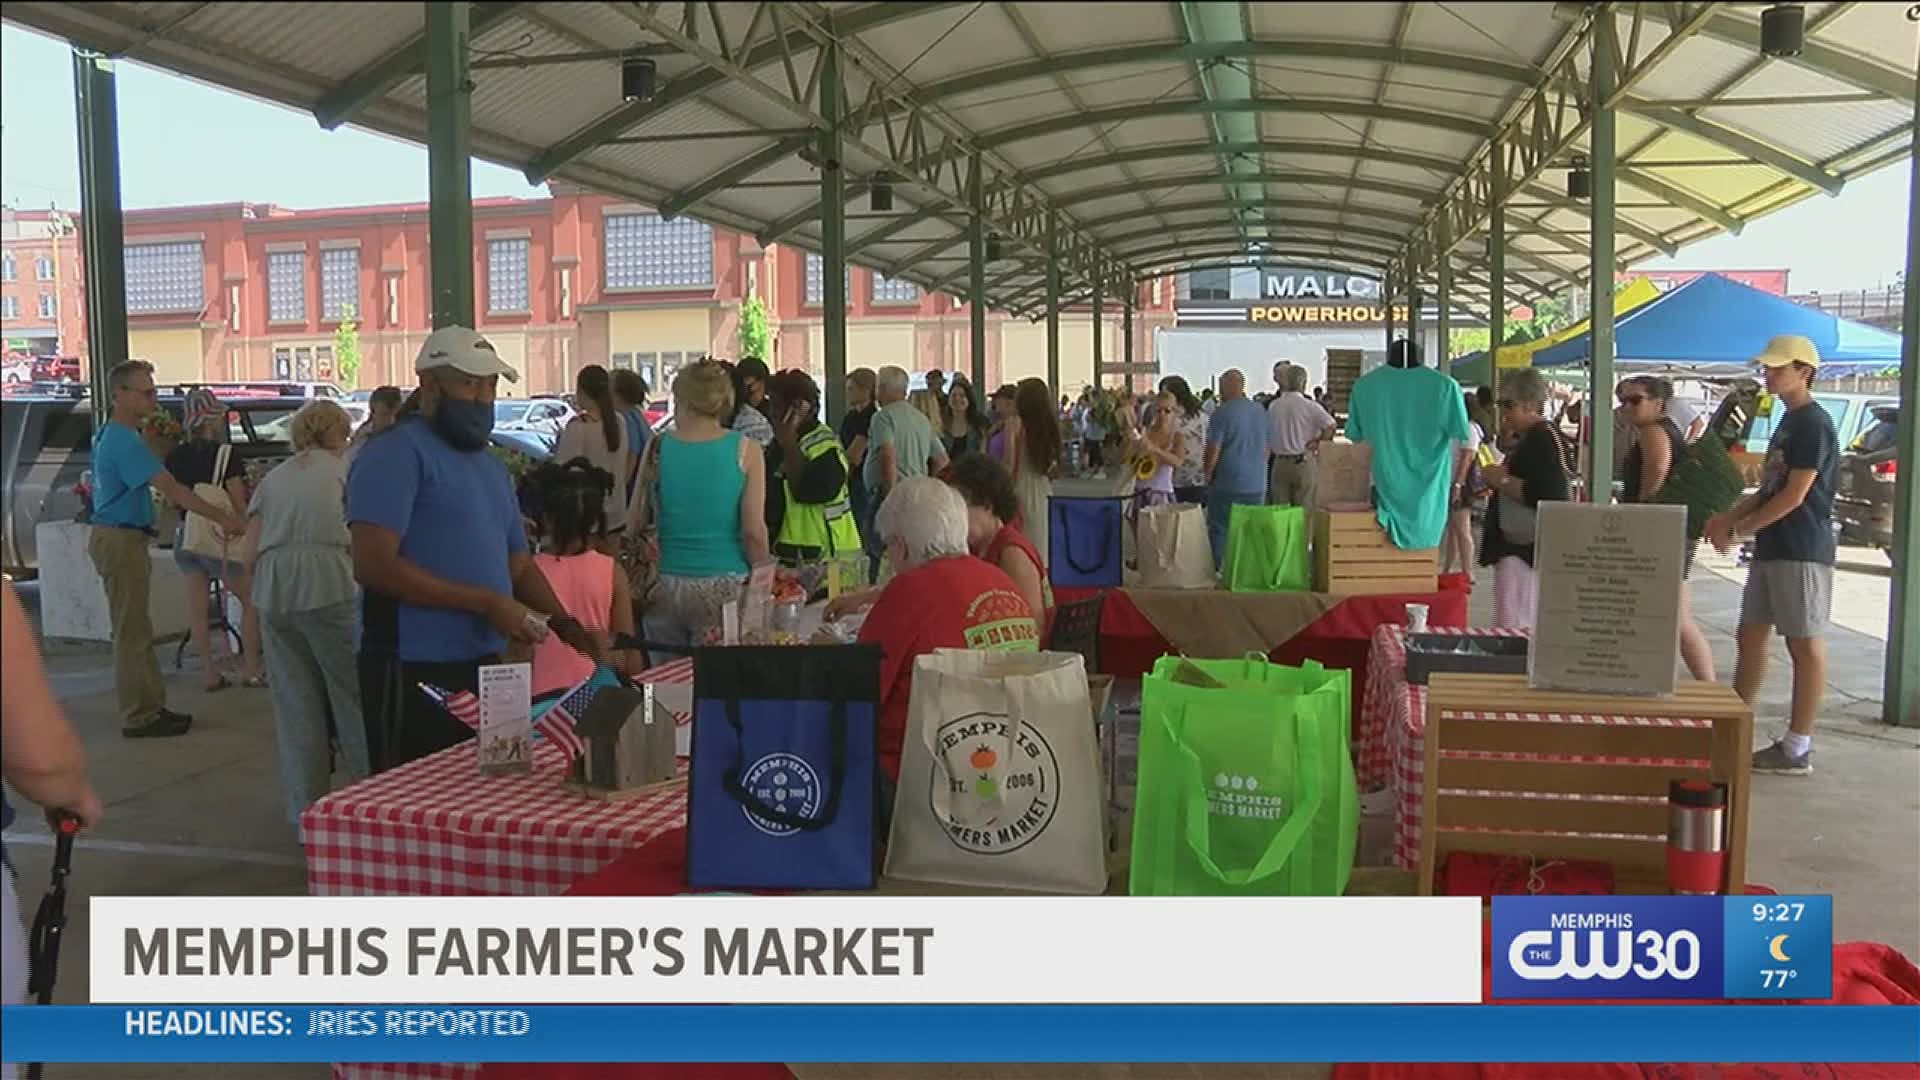 The Memphis Farmers Market is open 8:00 a.m. to 1:00 p.m. every Saturday through October.